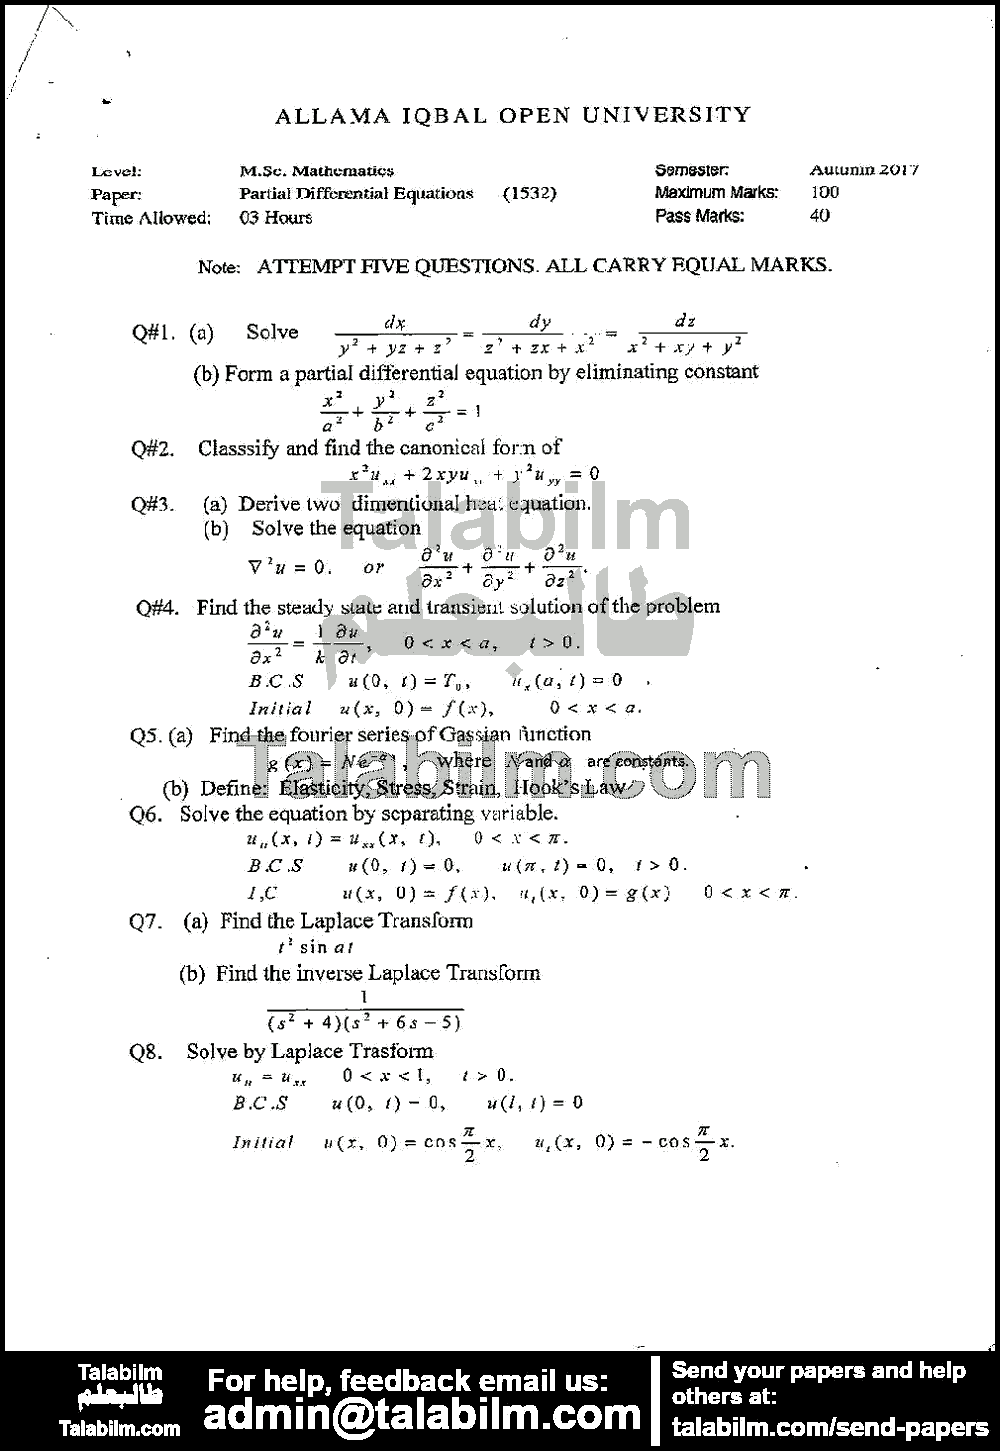 Partial Differential Equations 1532 past paper for Autumn 2017